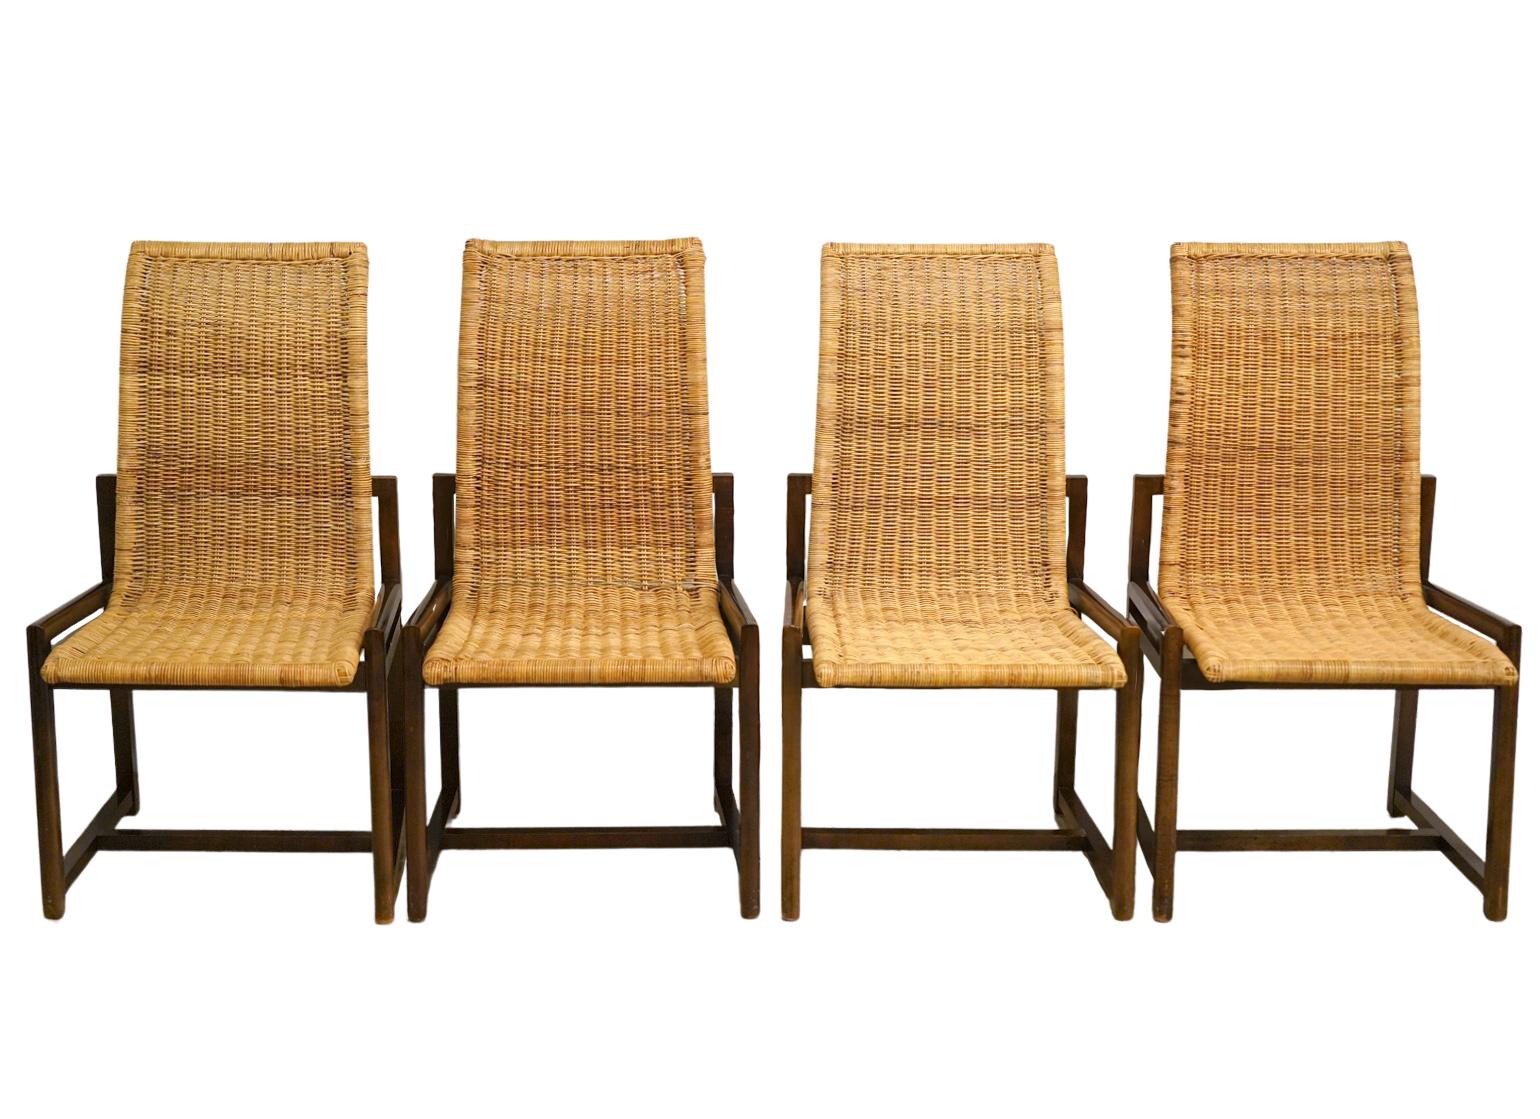 Set of 10 high-back rattan dining chairs. Made by Century Furniture Company but are unmarked. We have 2 arms chairs and 8 side chairs. Measure: Arm height is 25